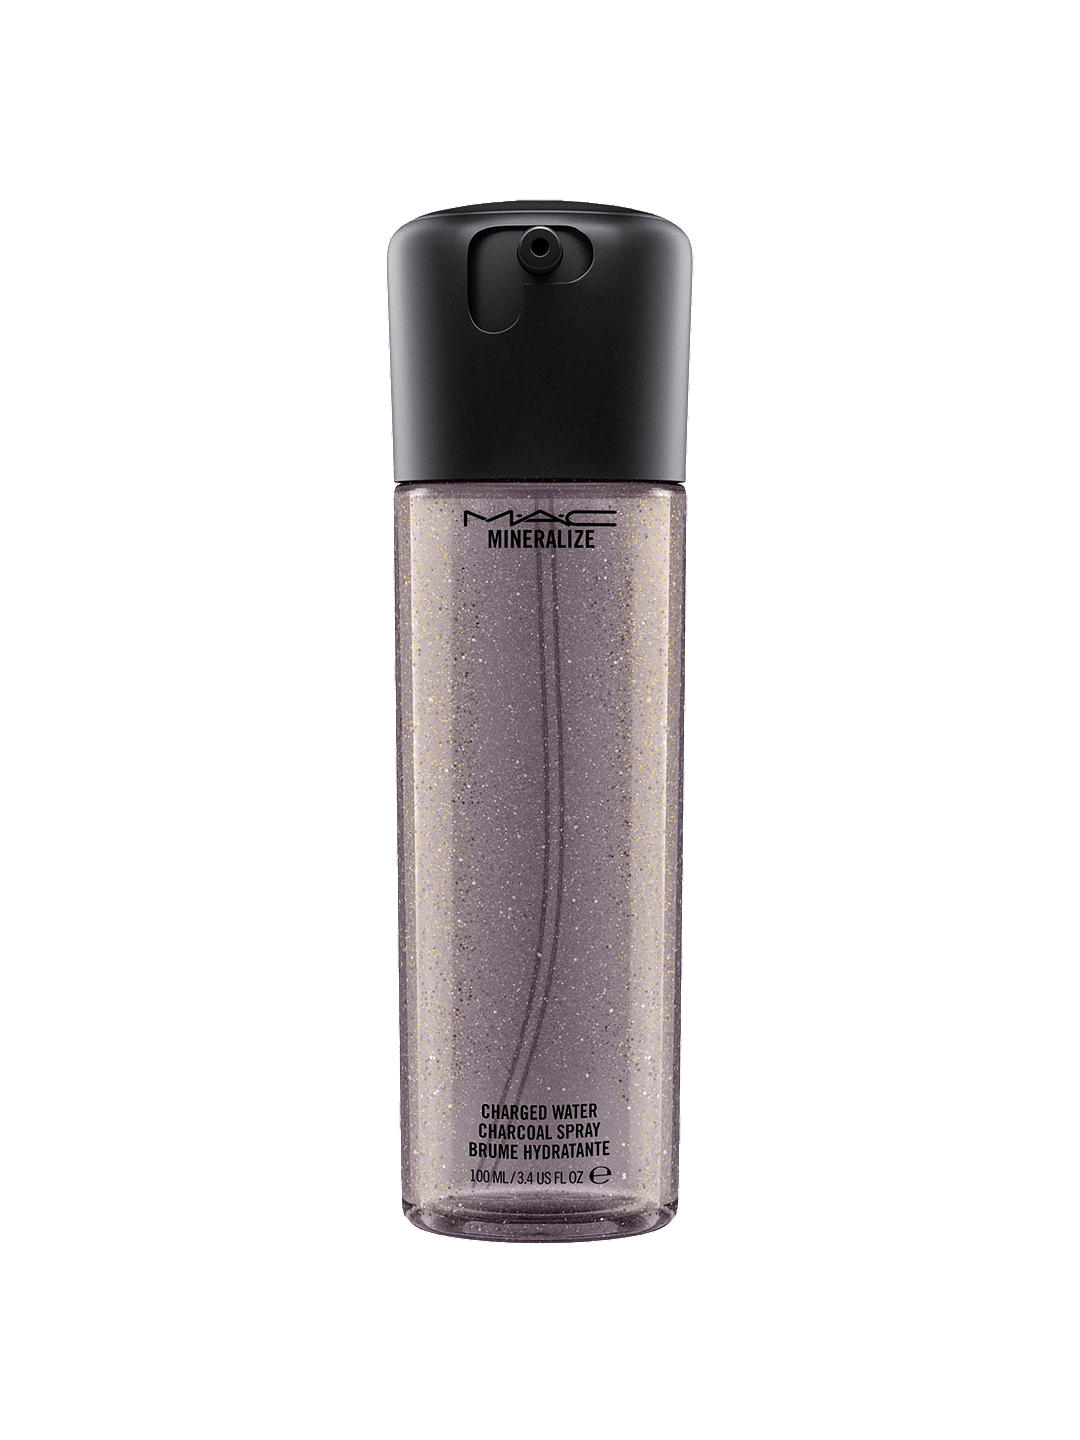 MAC Mineralize Charged Water Charcoal Spray 1